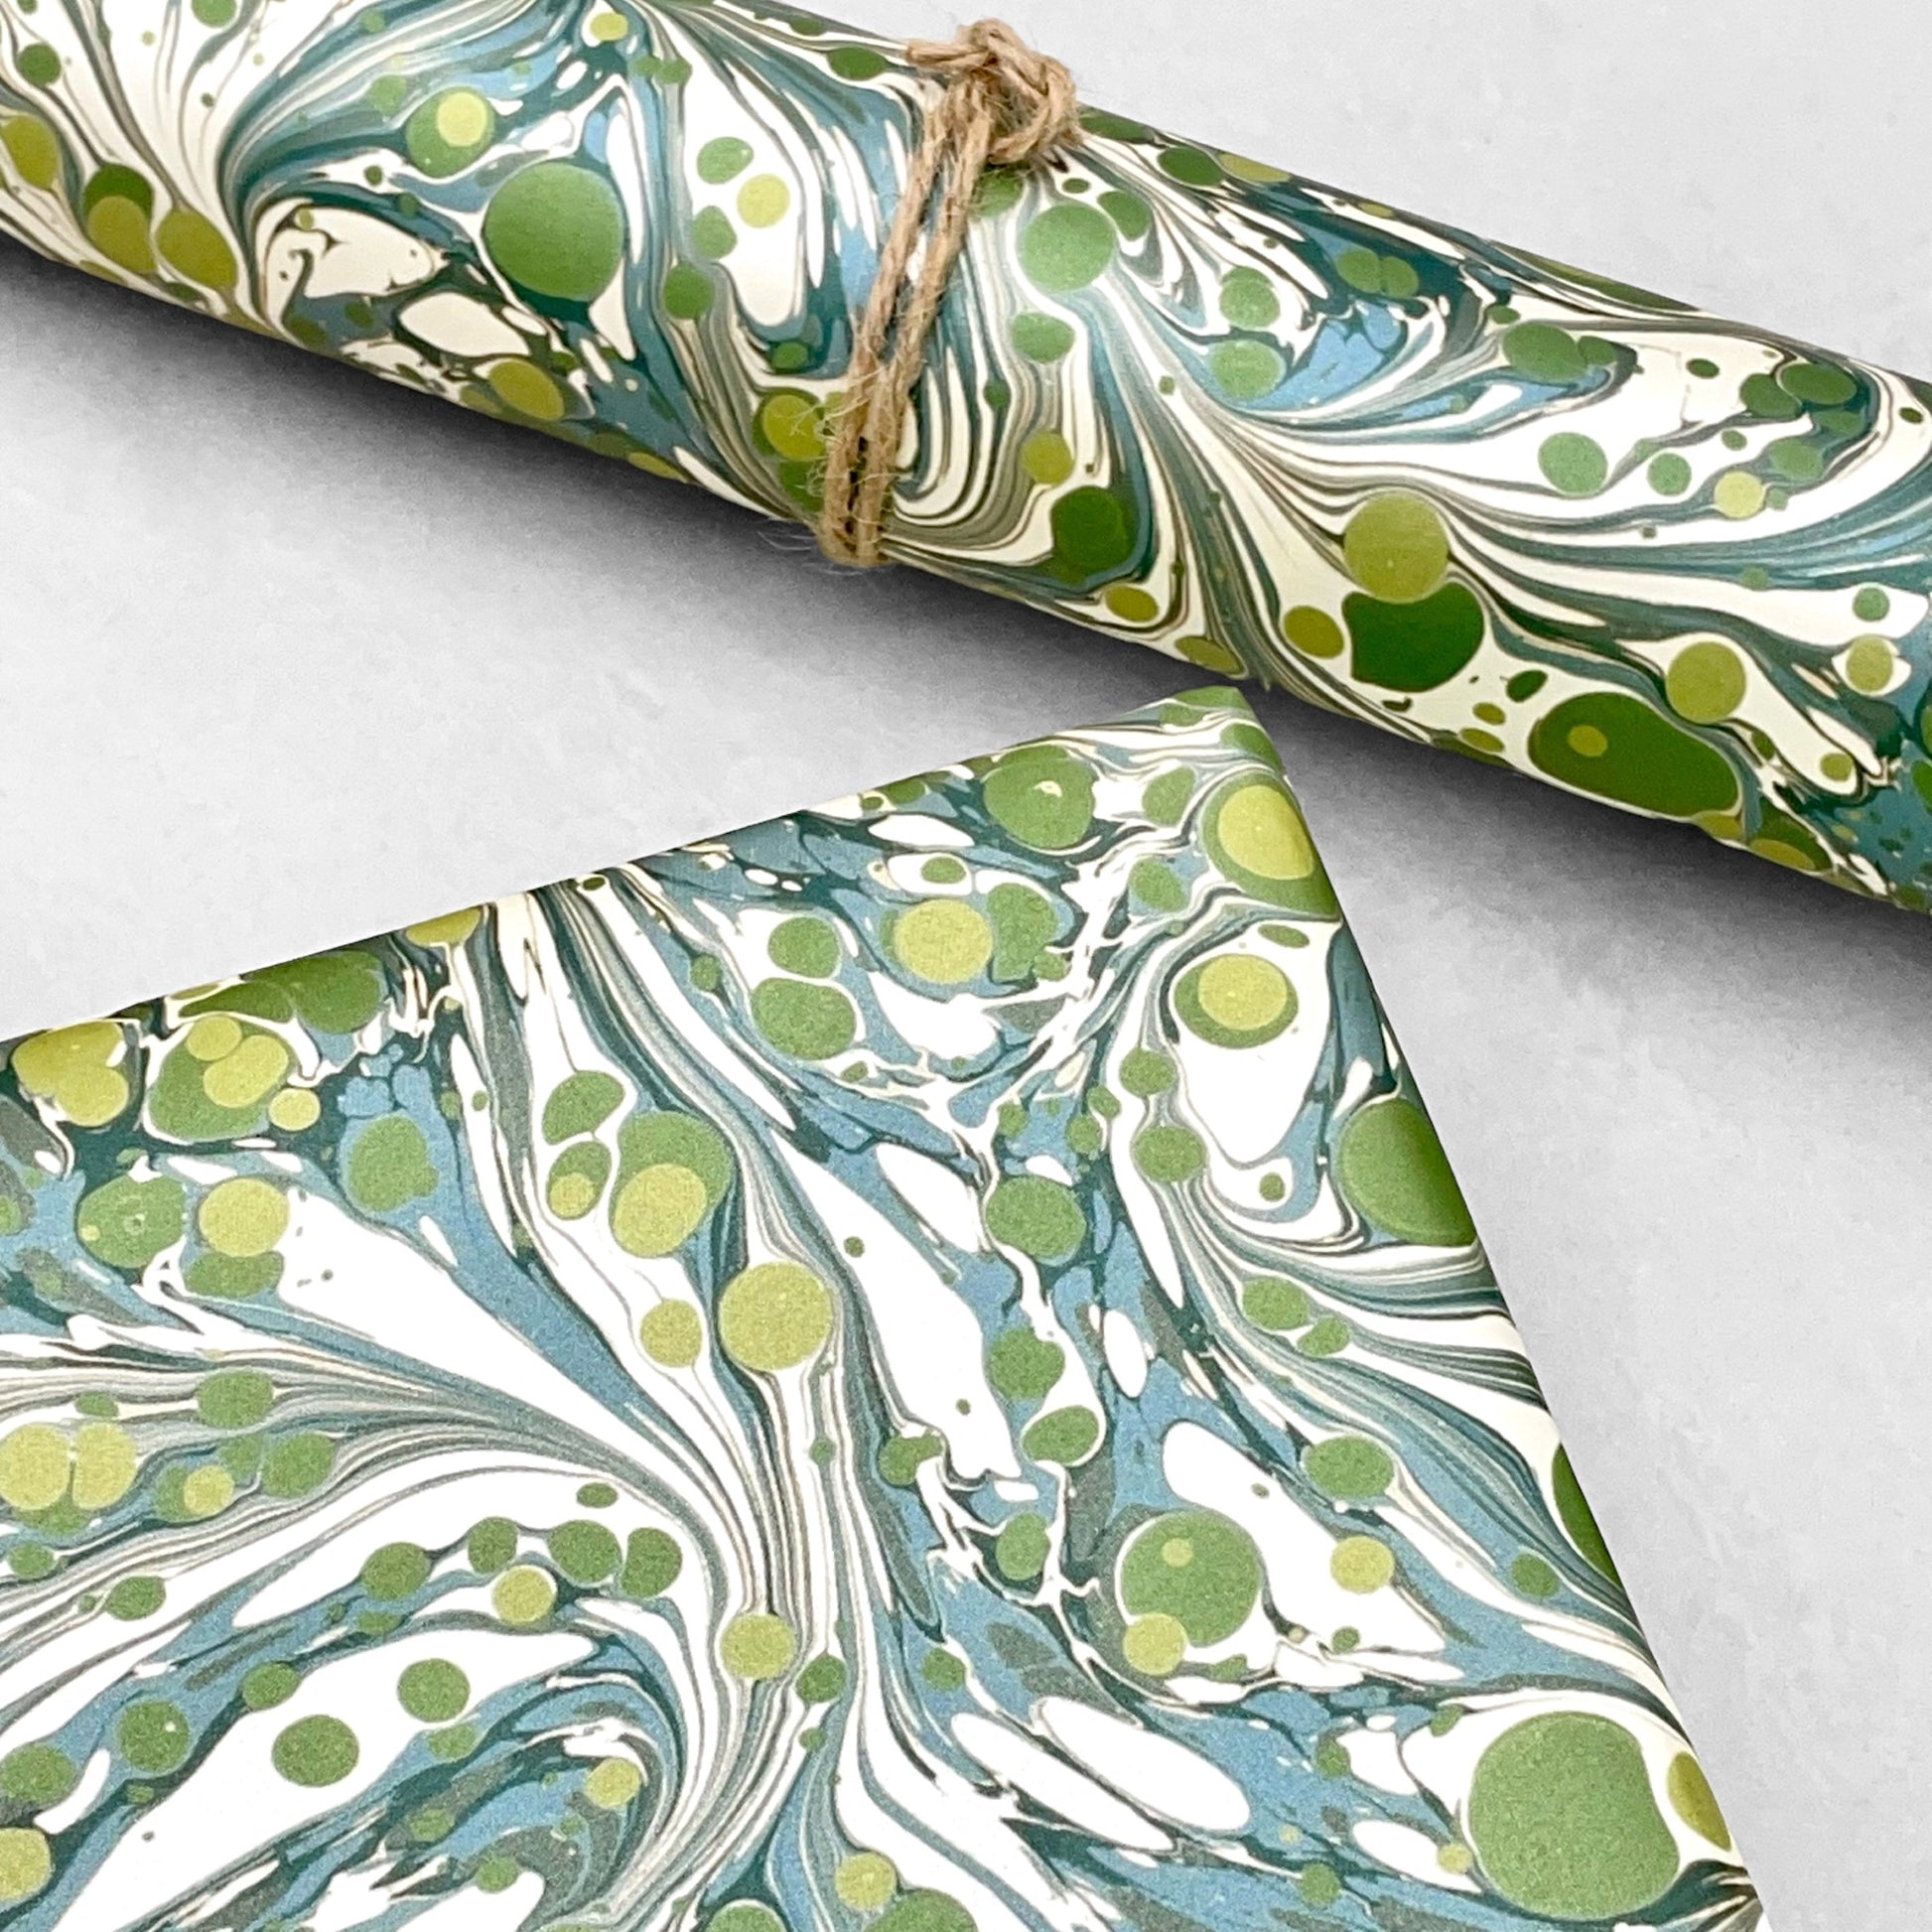 Printed marbled wrapping paper by Jemma Lewis Marbling. Marbled paper with a shimmery base paper and marbled pattern in green, lime and white